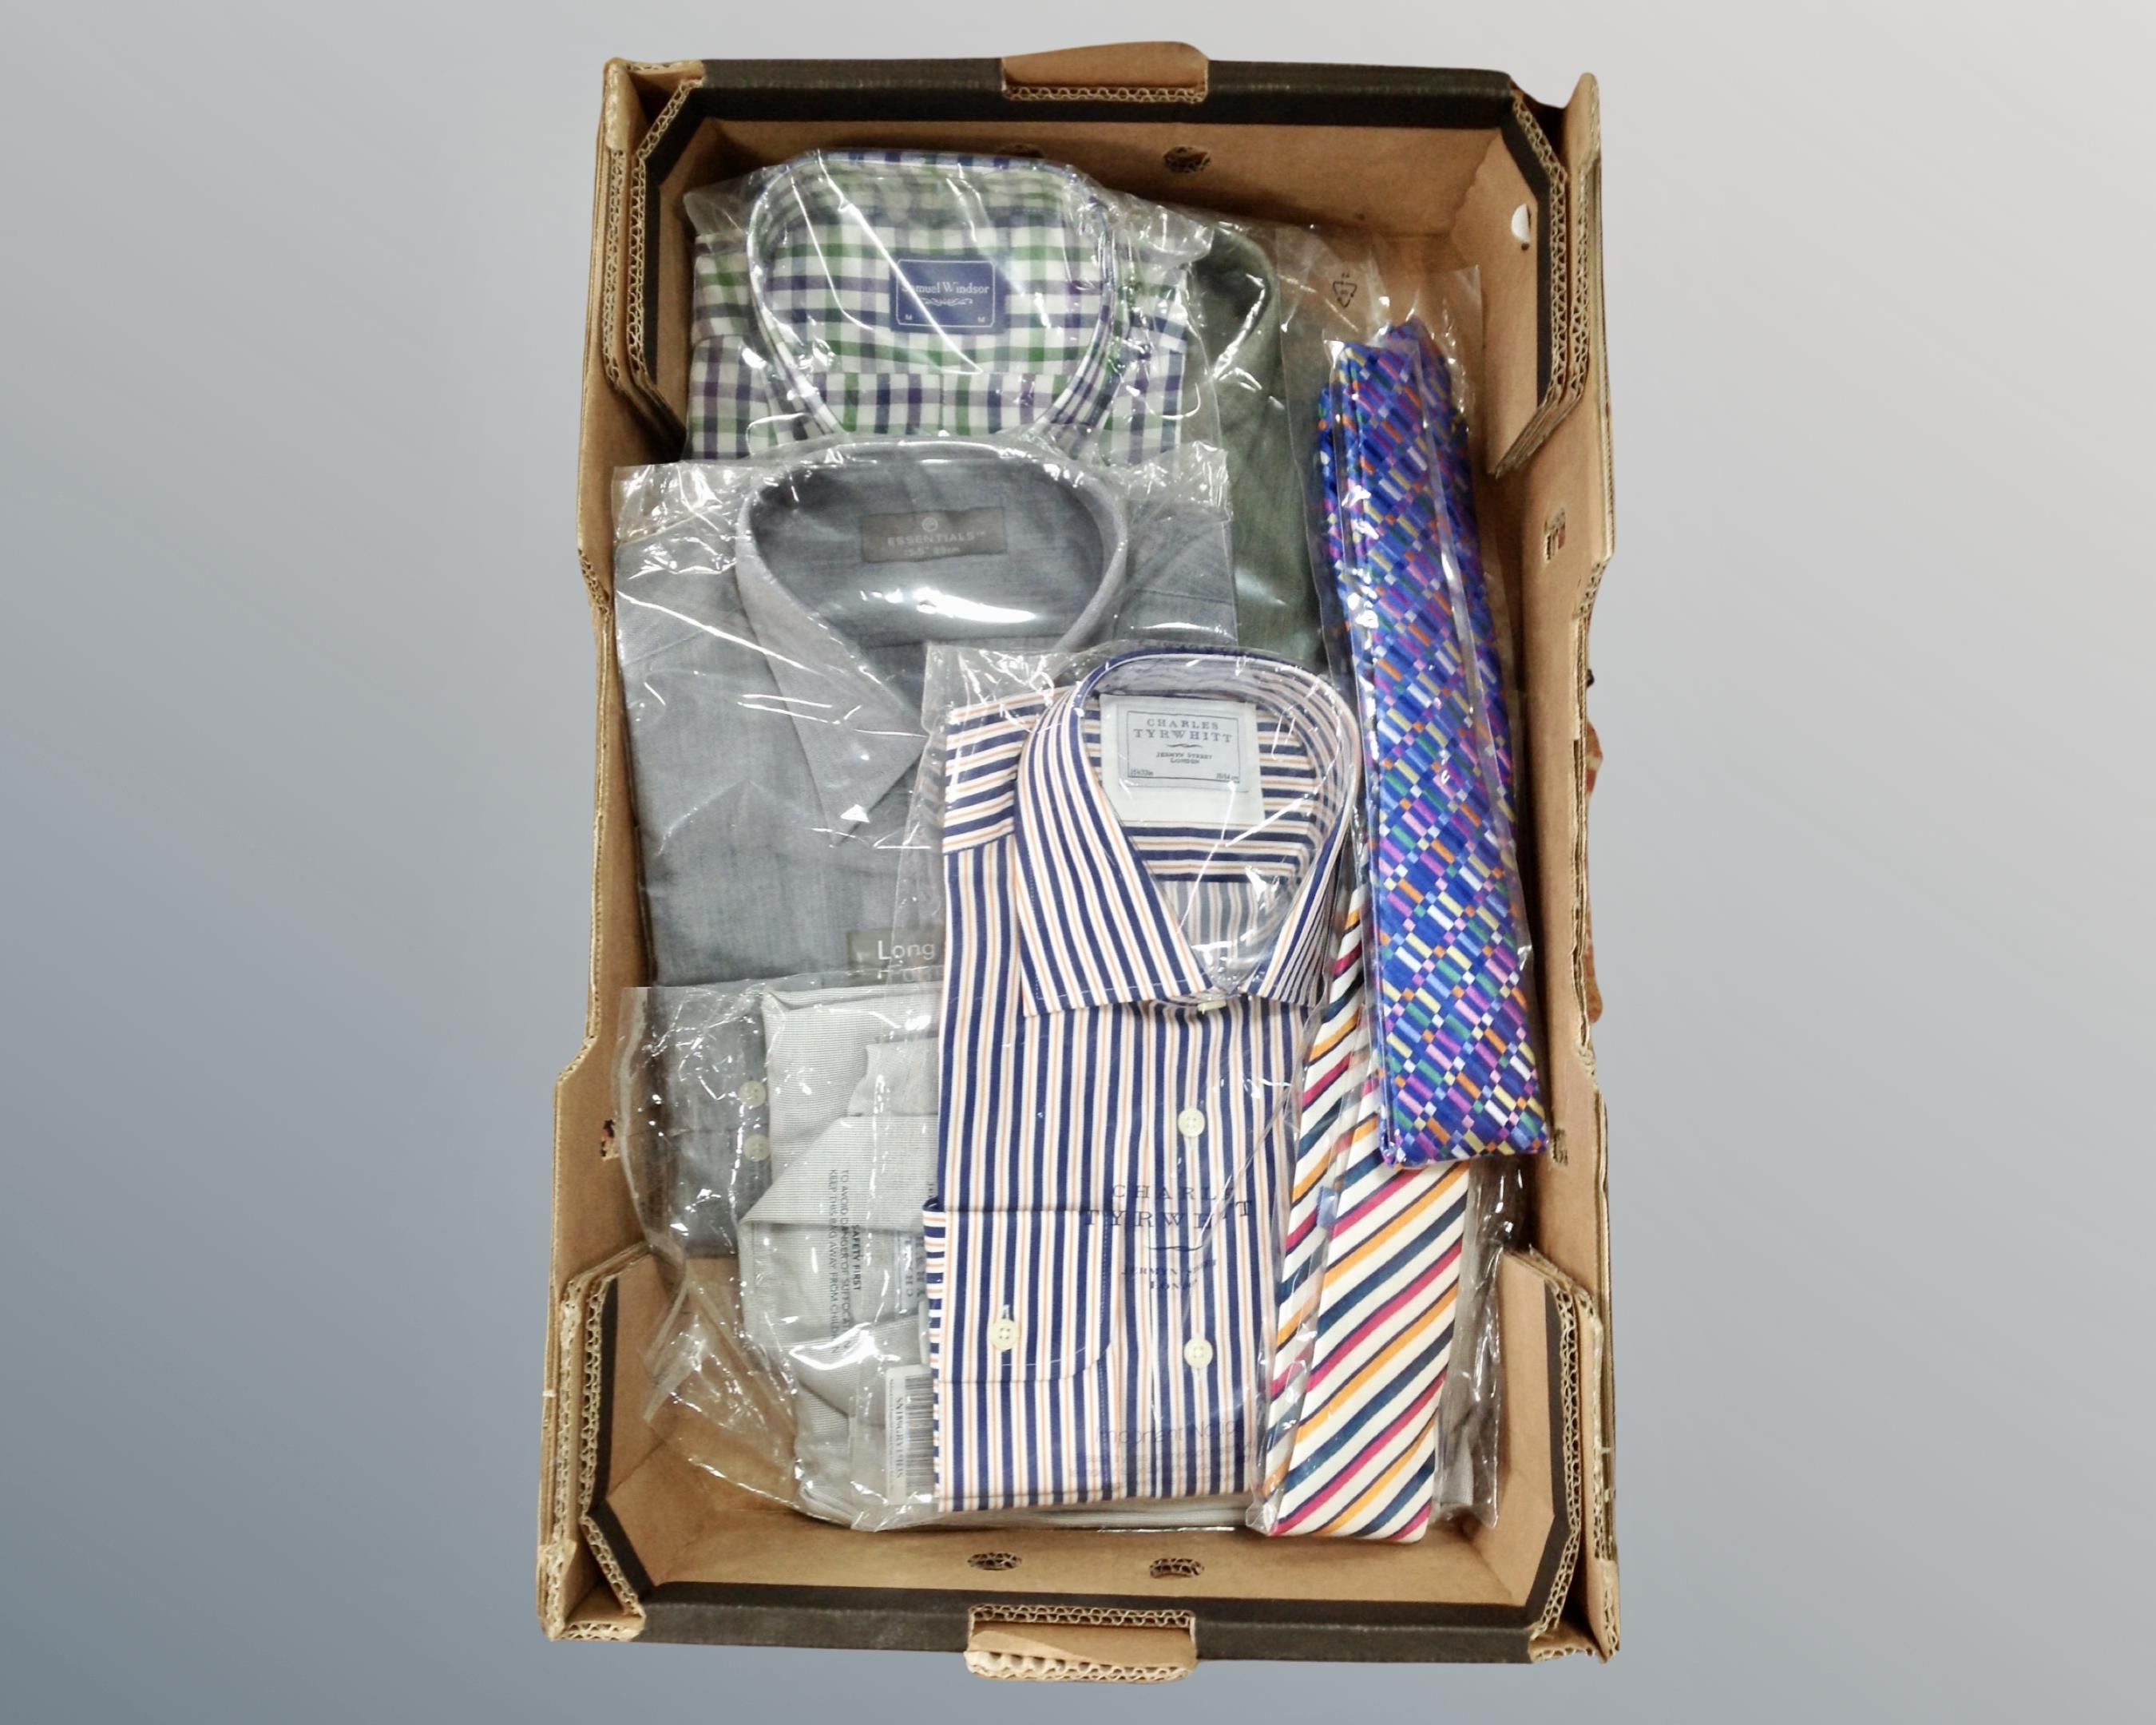 A box containing new gent's formal shirts by Charles Tyrwhitt and Samuel Windsor together with two